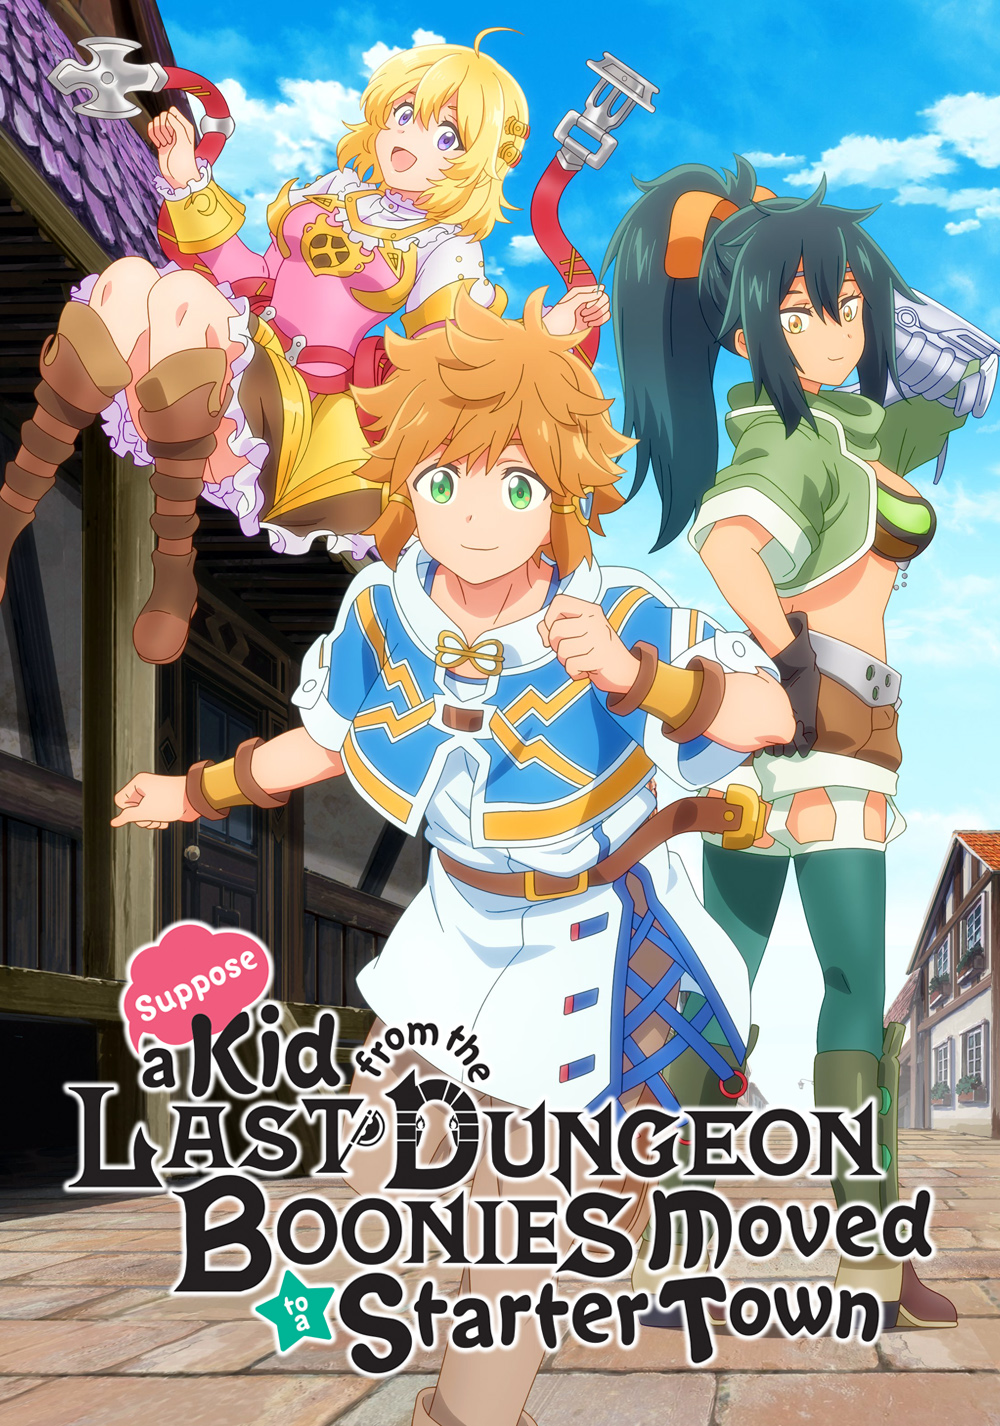 Suppose a Kid from the Last Dungeon Boonies moved to a starter town  (English Dub) Suppose a kid from the last dungeon boonies got used to life  in a starter town? 